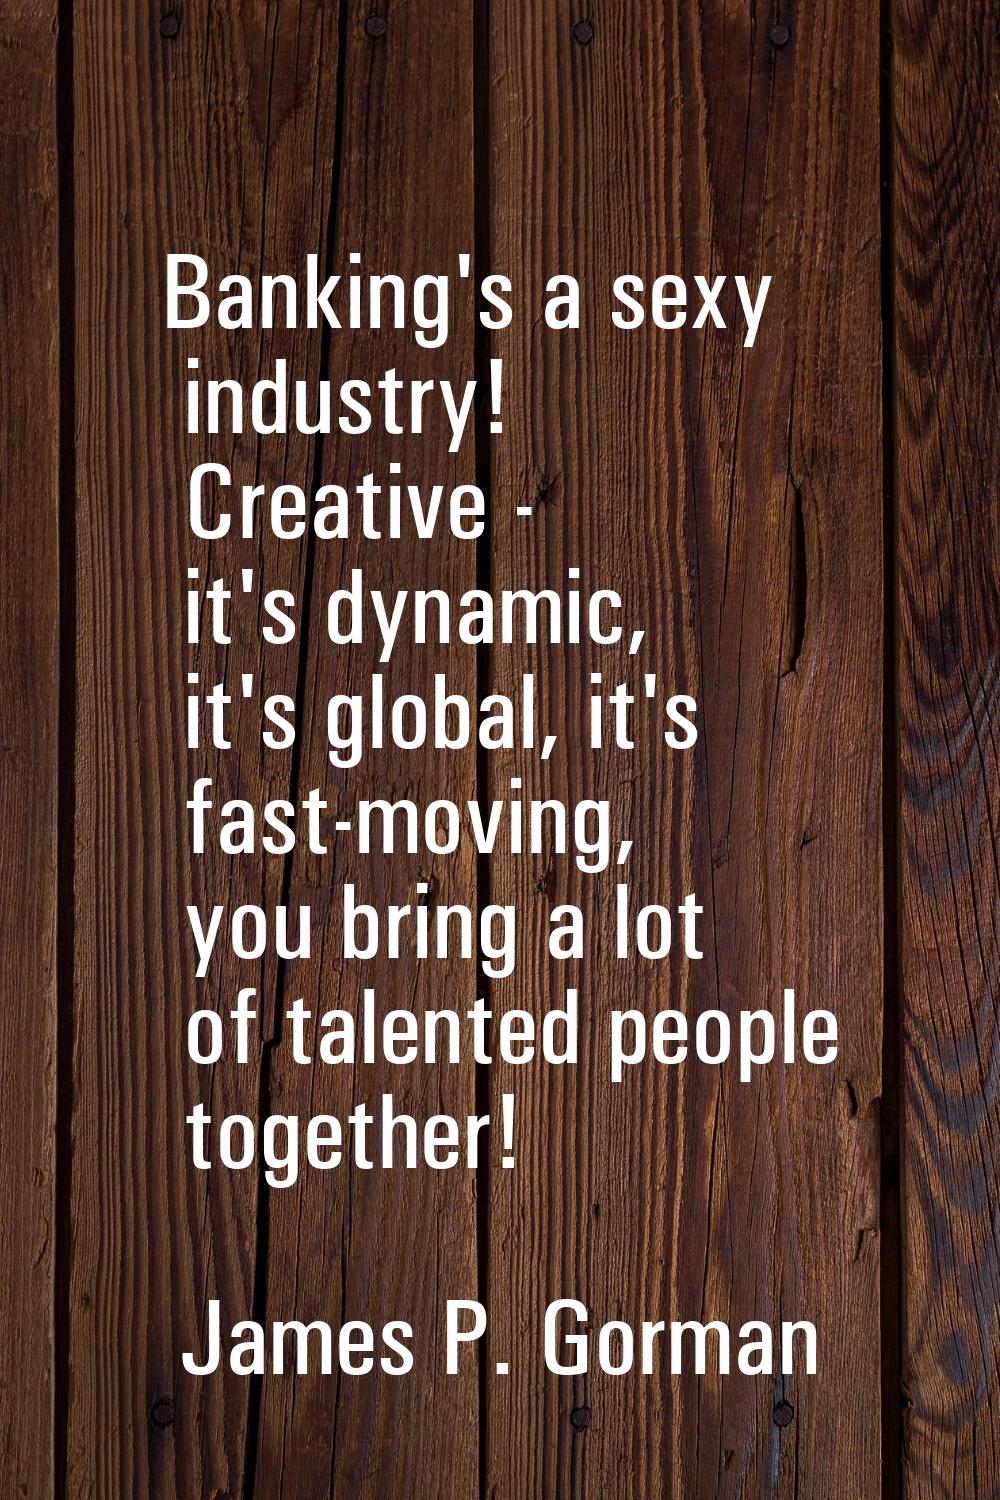 Banking's a sexy industry! Creative - it's dynamic, it's global, it's fast-moving, you bring a lot 